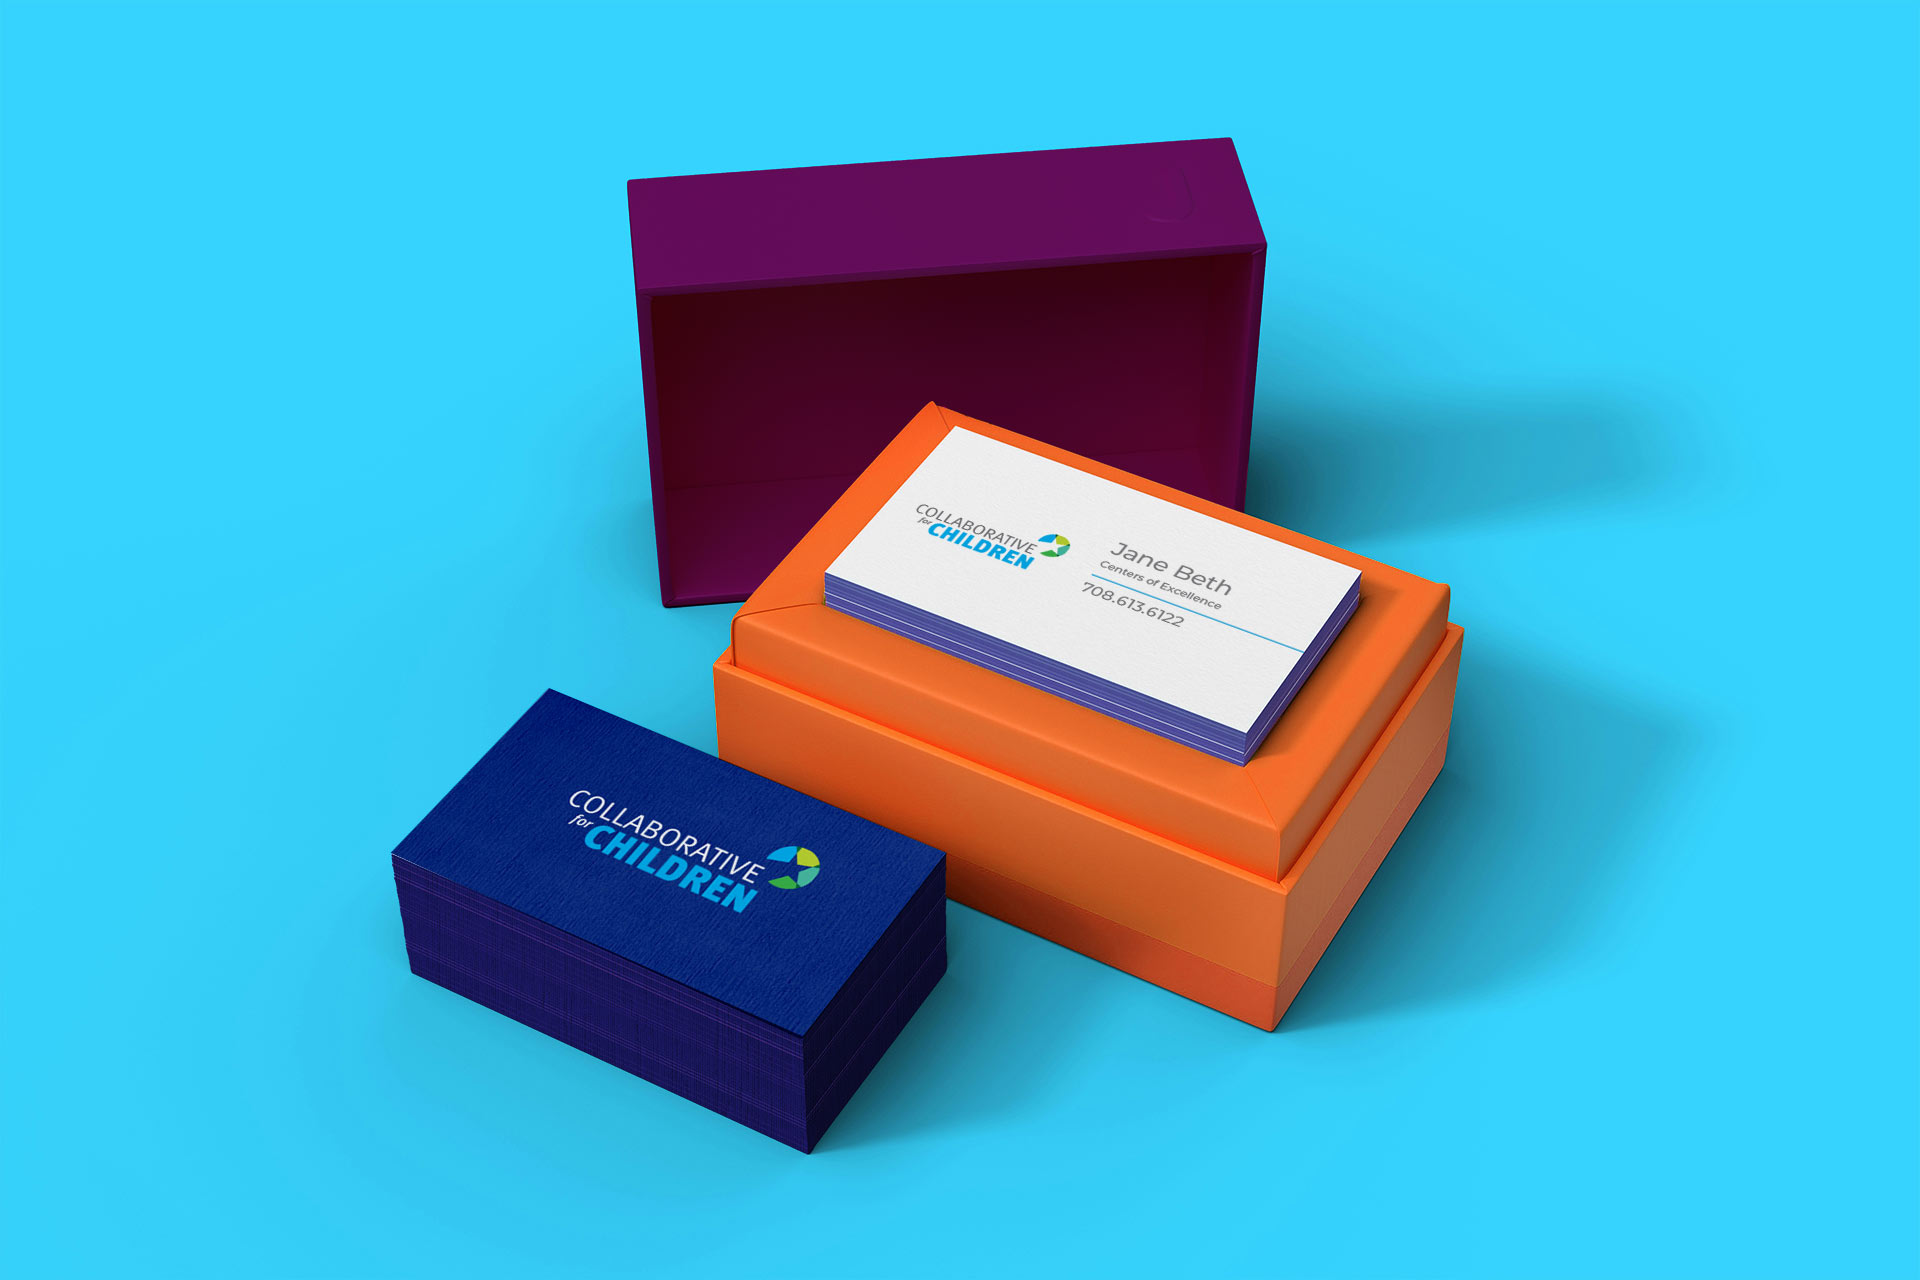 The clients logo appears on a stack of blue business cards.